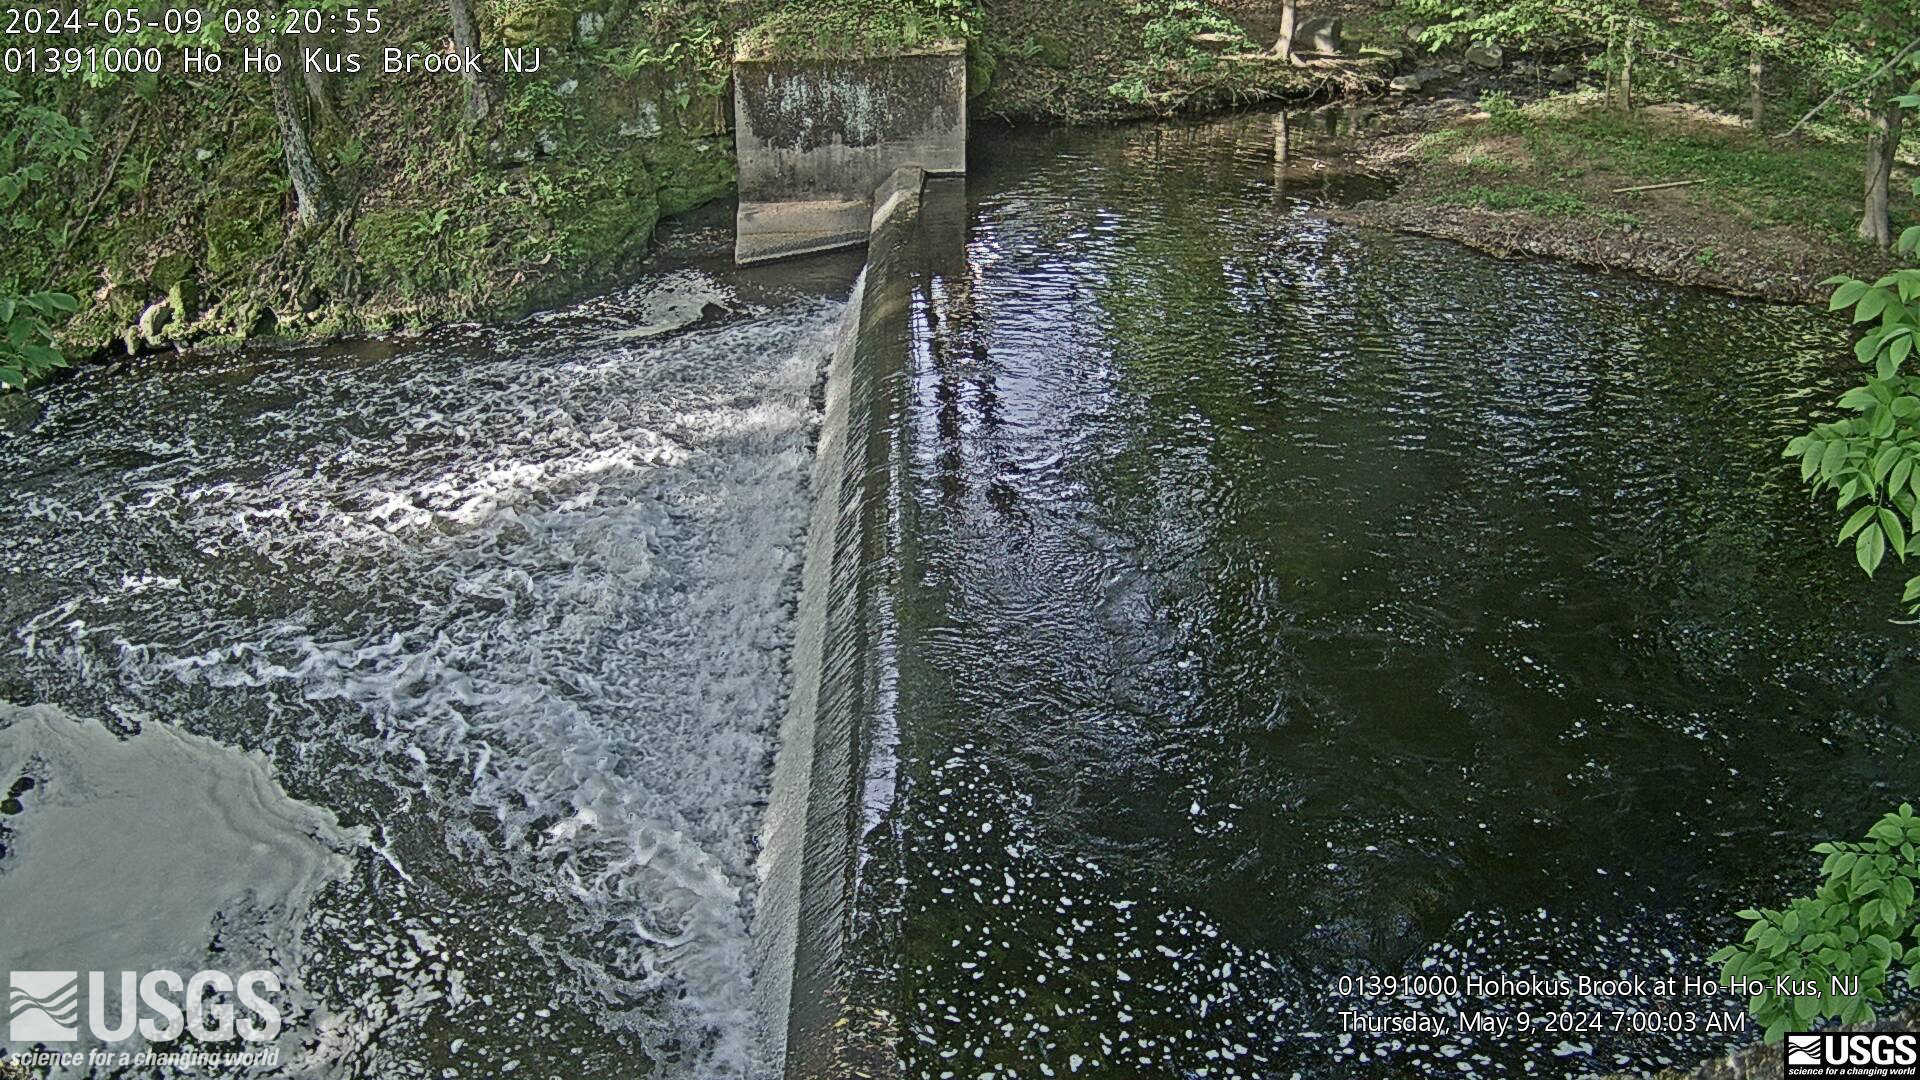 View of the Weir at Hohokus Brook